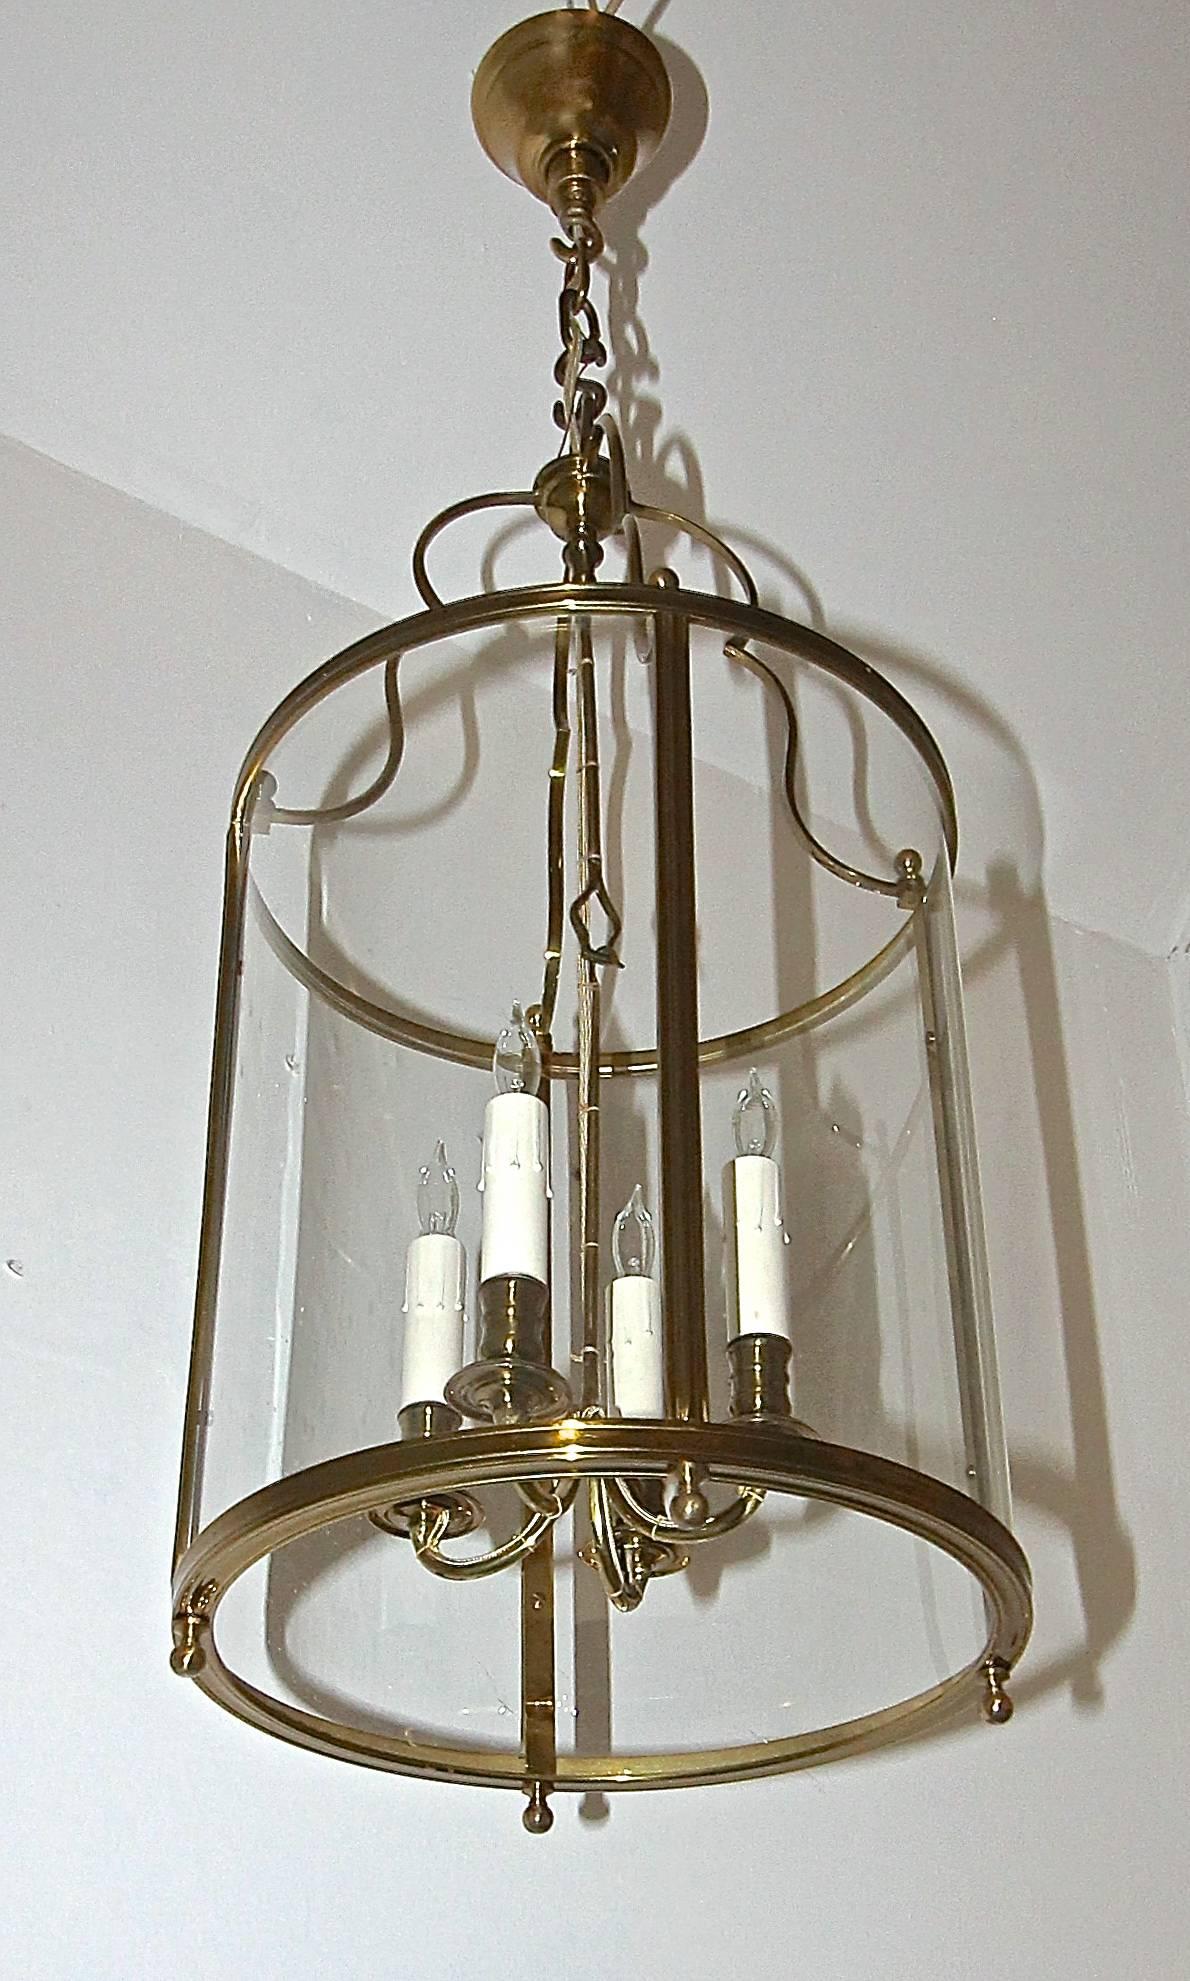 Exquisite and delicate bronze four-light ceiling hall or entry lantern by Maison Baguès, Paris. Four delicate candle arms and four curved glass panels. French style attached wiring to arms. Fixture uses four 40 watt max candelabra base bulbs, newly